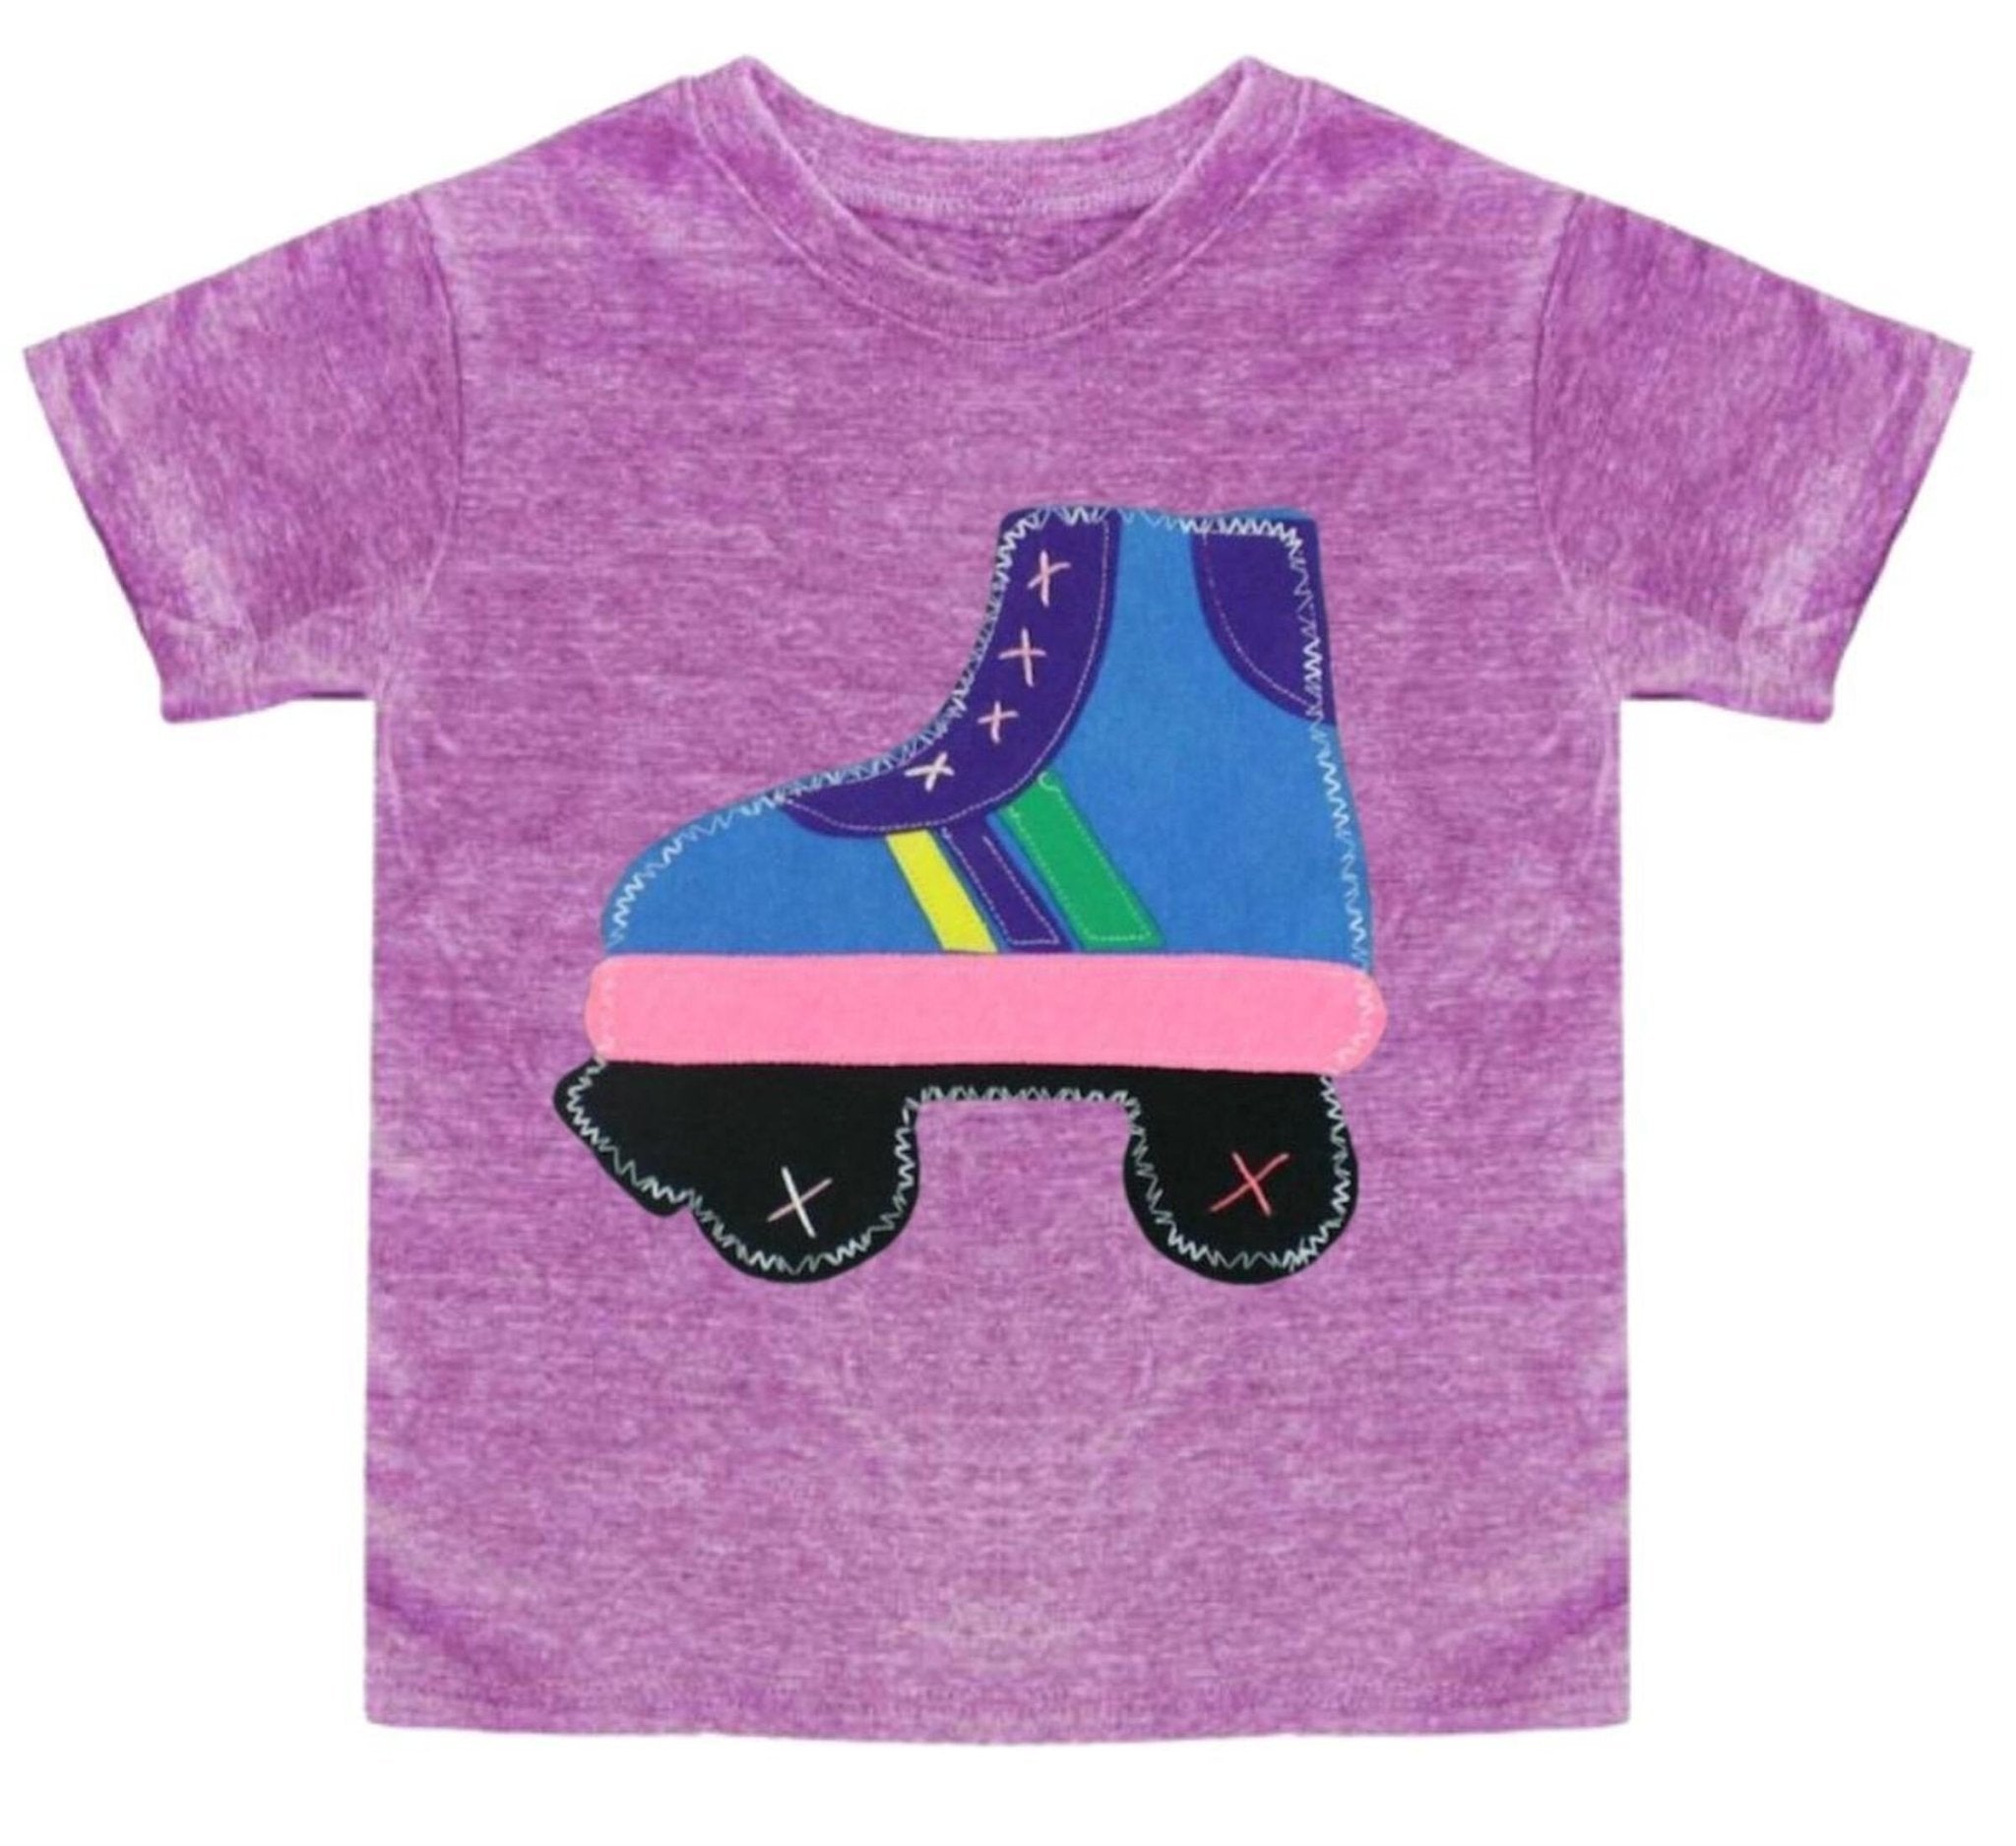 Rollerskate Tee - Something about Sofia